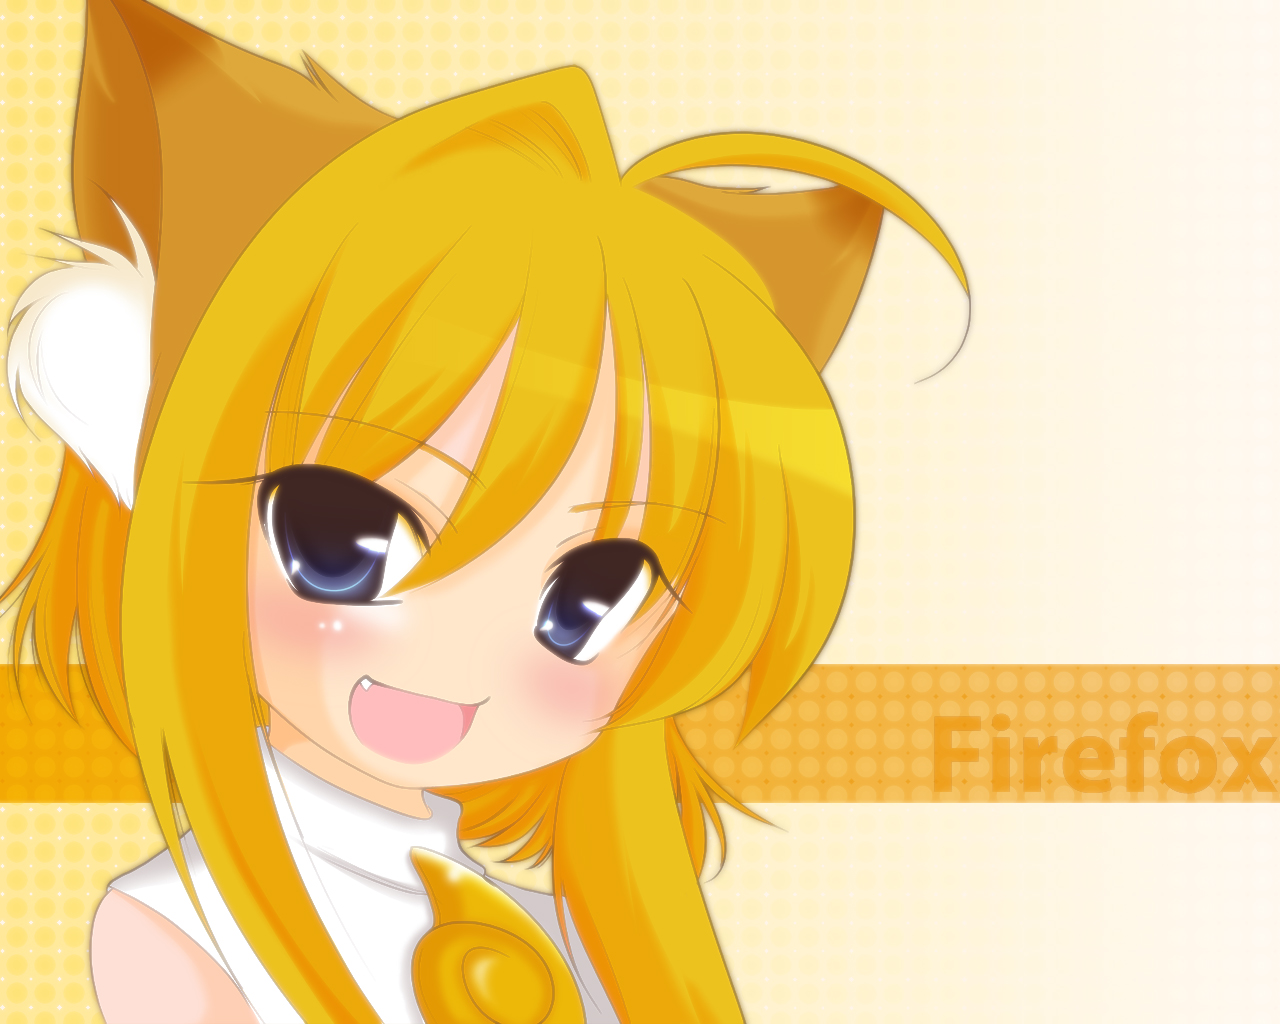 A combination with Anime-Firefox-tan by Amasenutiko on DeviantArt